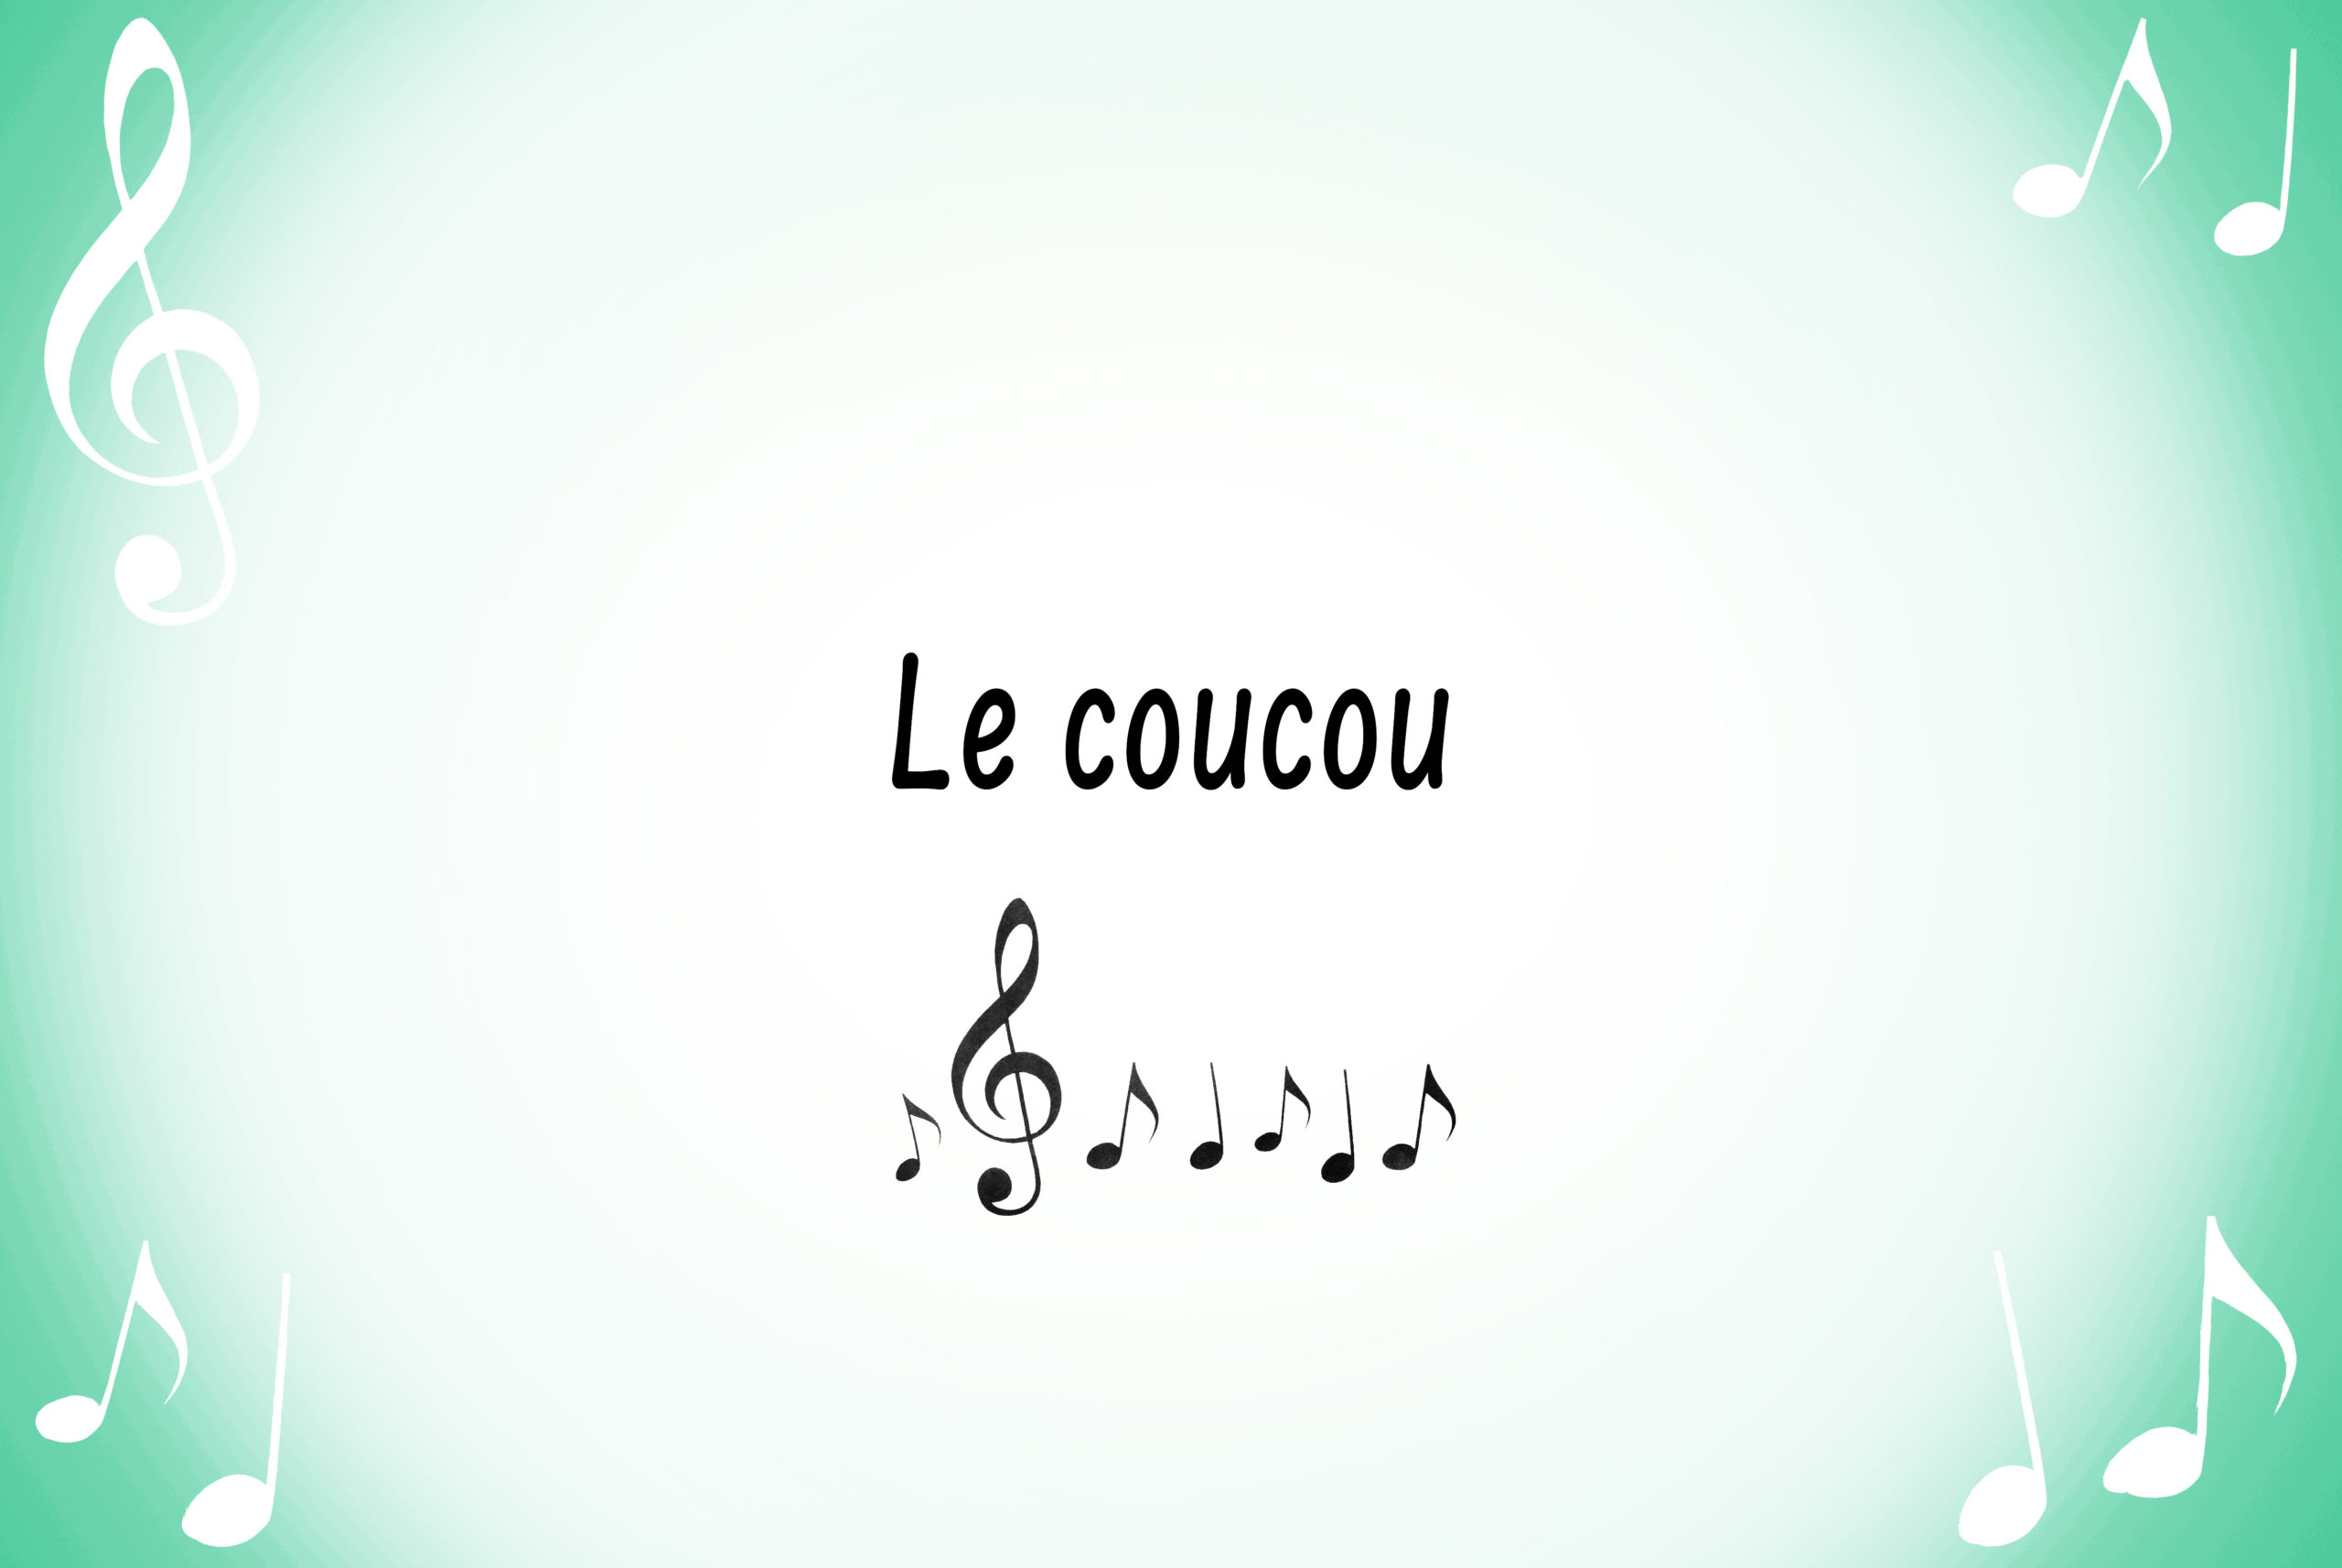 Le coucou - French Moments